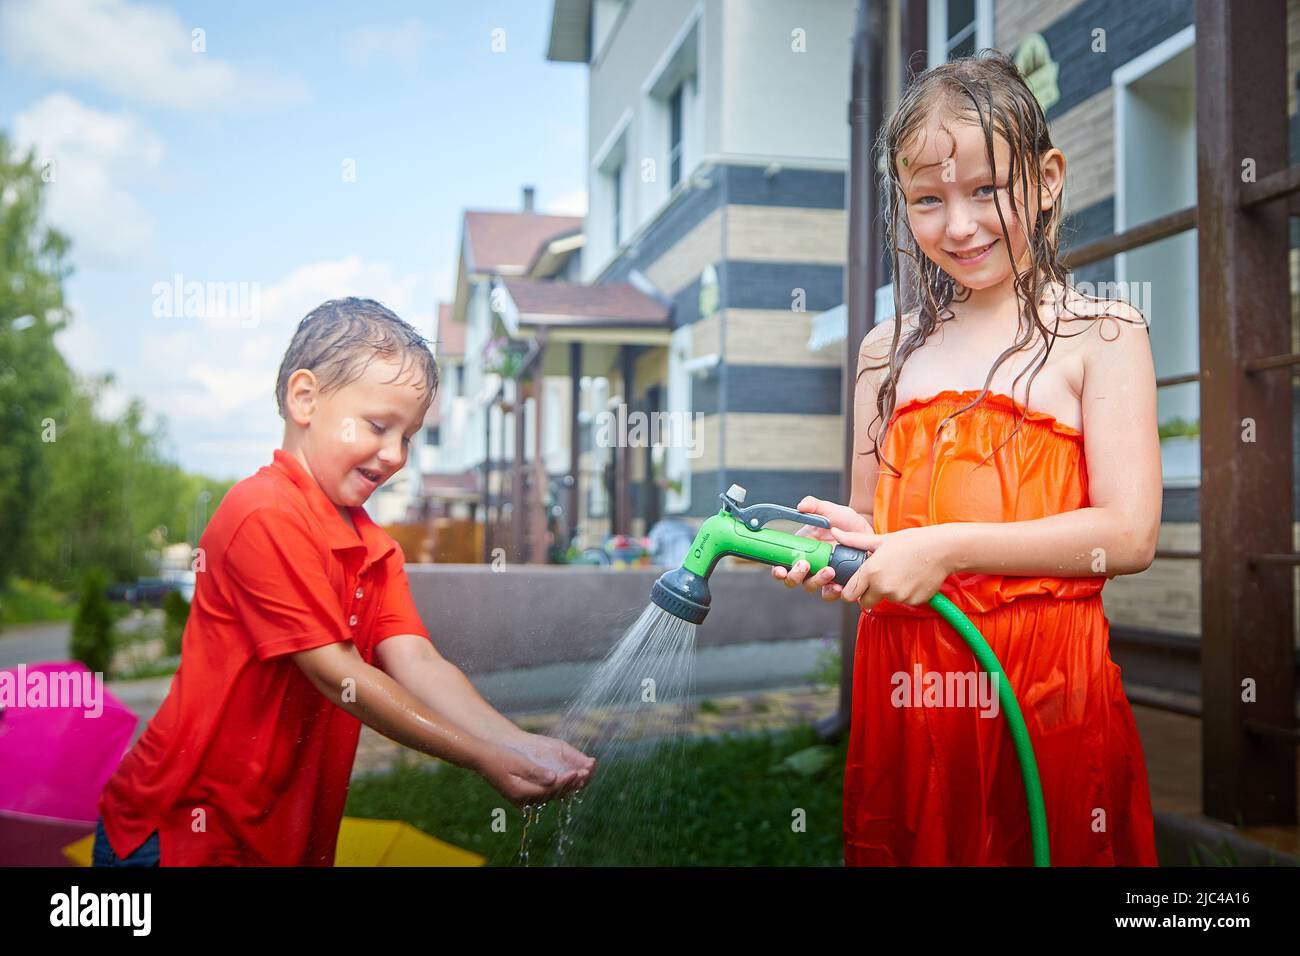 Children playing with garden sprinkler. Brother and sister running and jumping. Summer outdoor water fun in backyard. Boy and girl play with hose Stock Photo